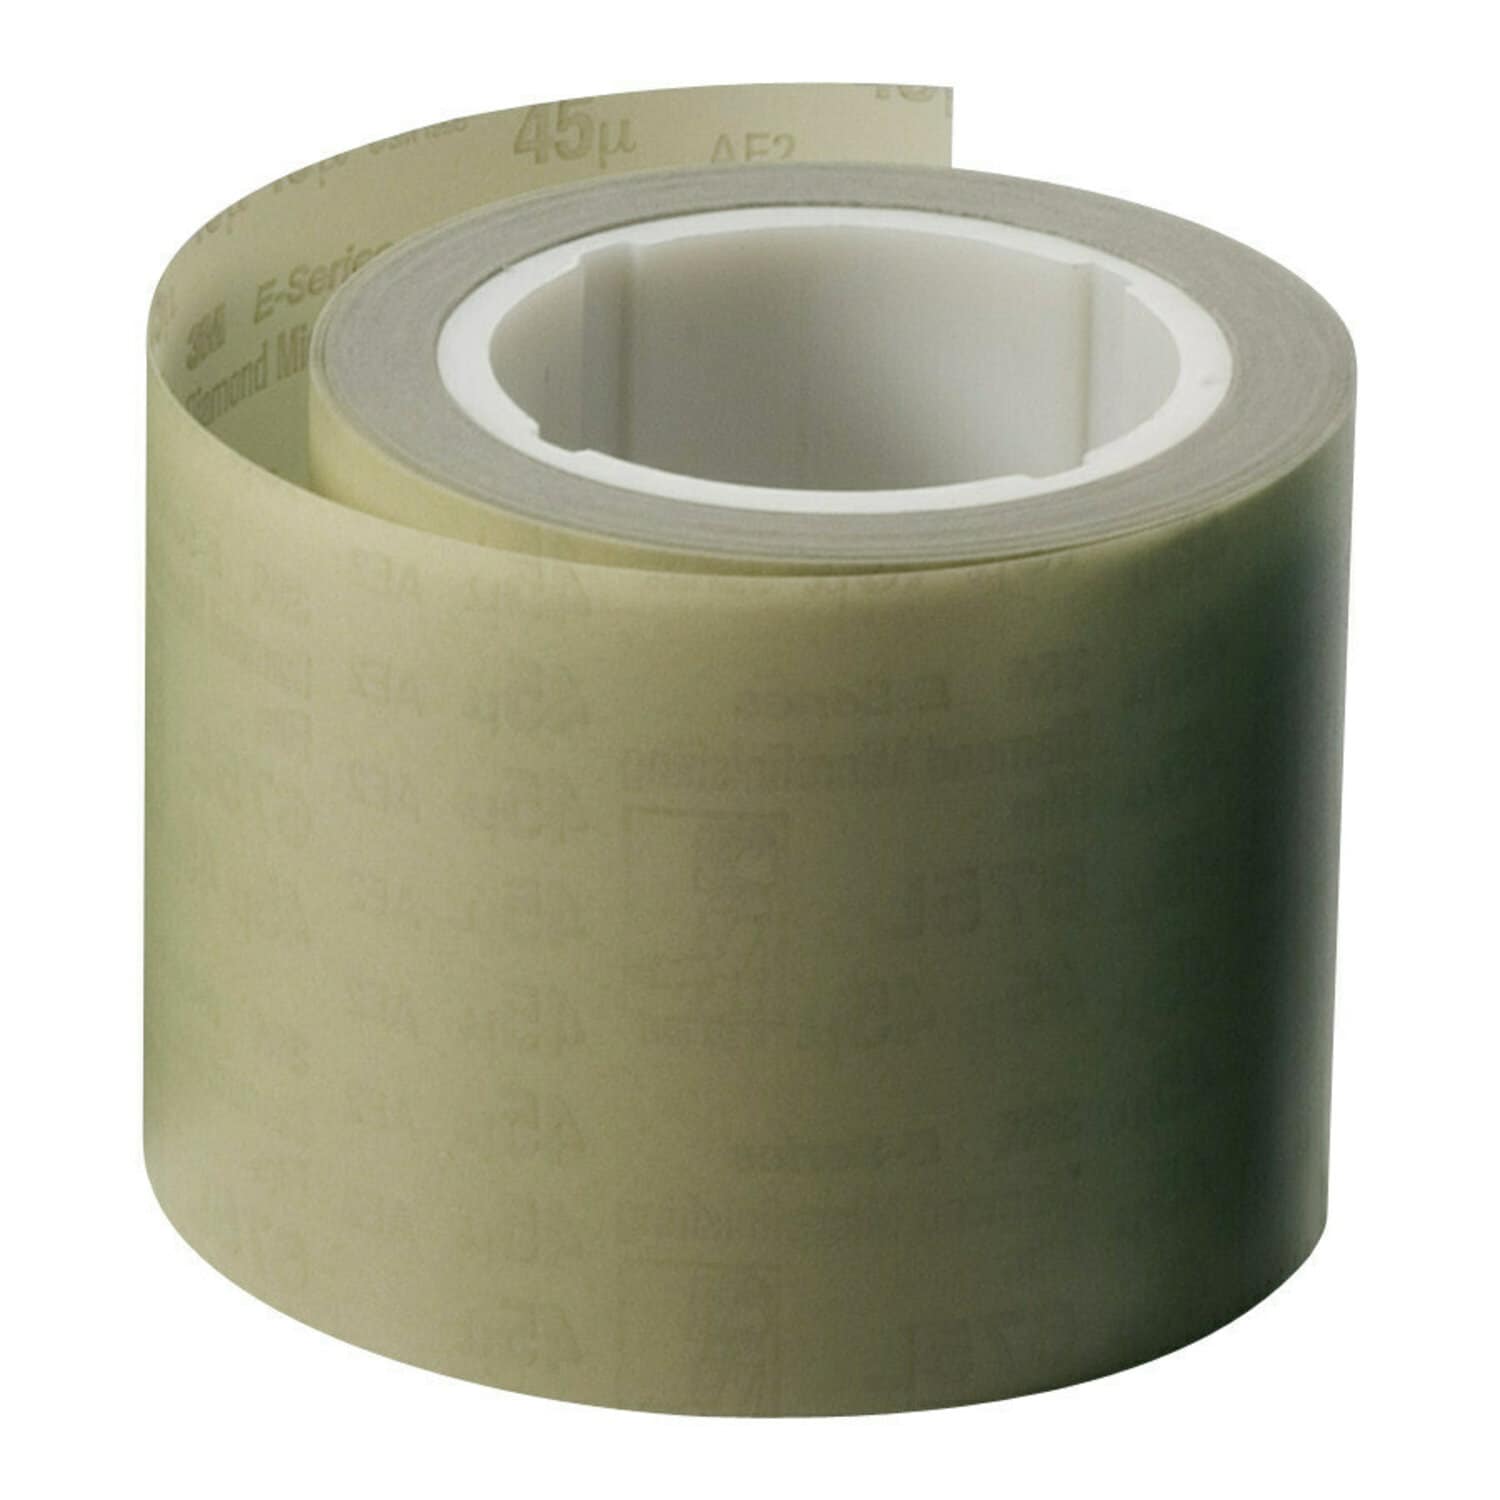 3M Double Coated Paper Tape 401M, Natural, 2 in x 36 yd, 9 Mil